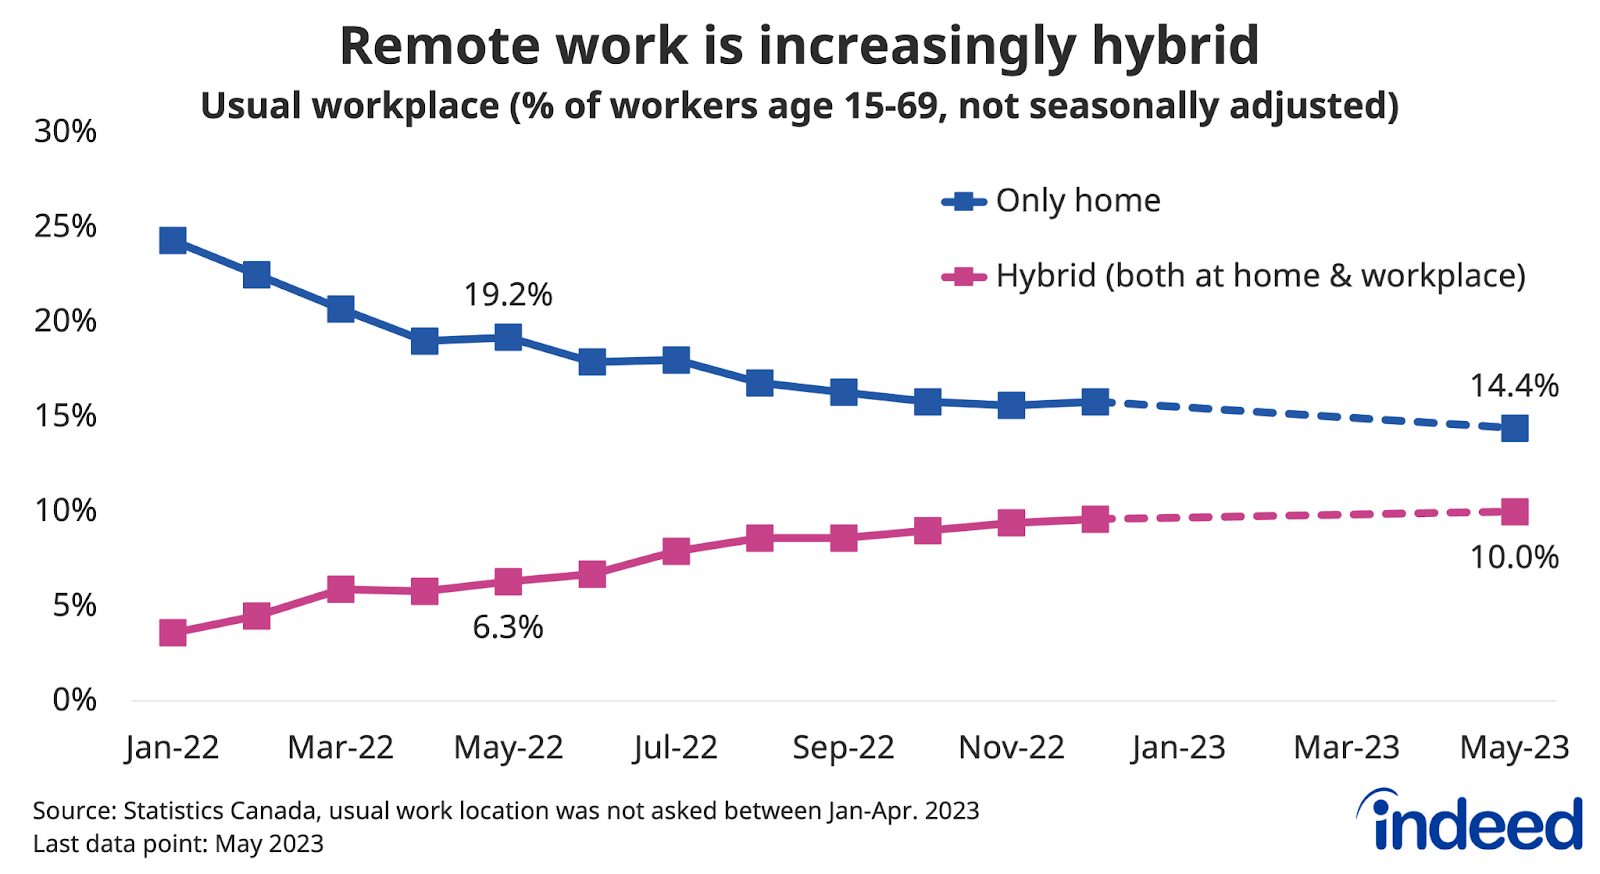 Line chart titled “Remote work is increasingly hybrid,” shows the share of Canadian workers by usual work location between January 2022 and May 2023. In May 2023, 10.0% of workers usually split time their week between home and the workplace, while 14.4% worked exclusively at home. The shares a year earlier were 6.3% and 19.2%, respectively. 